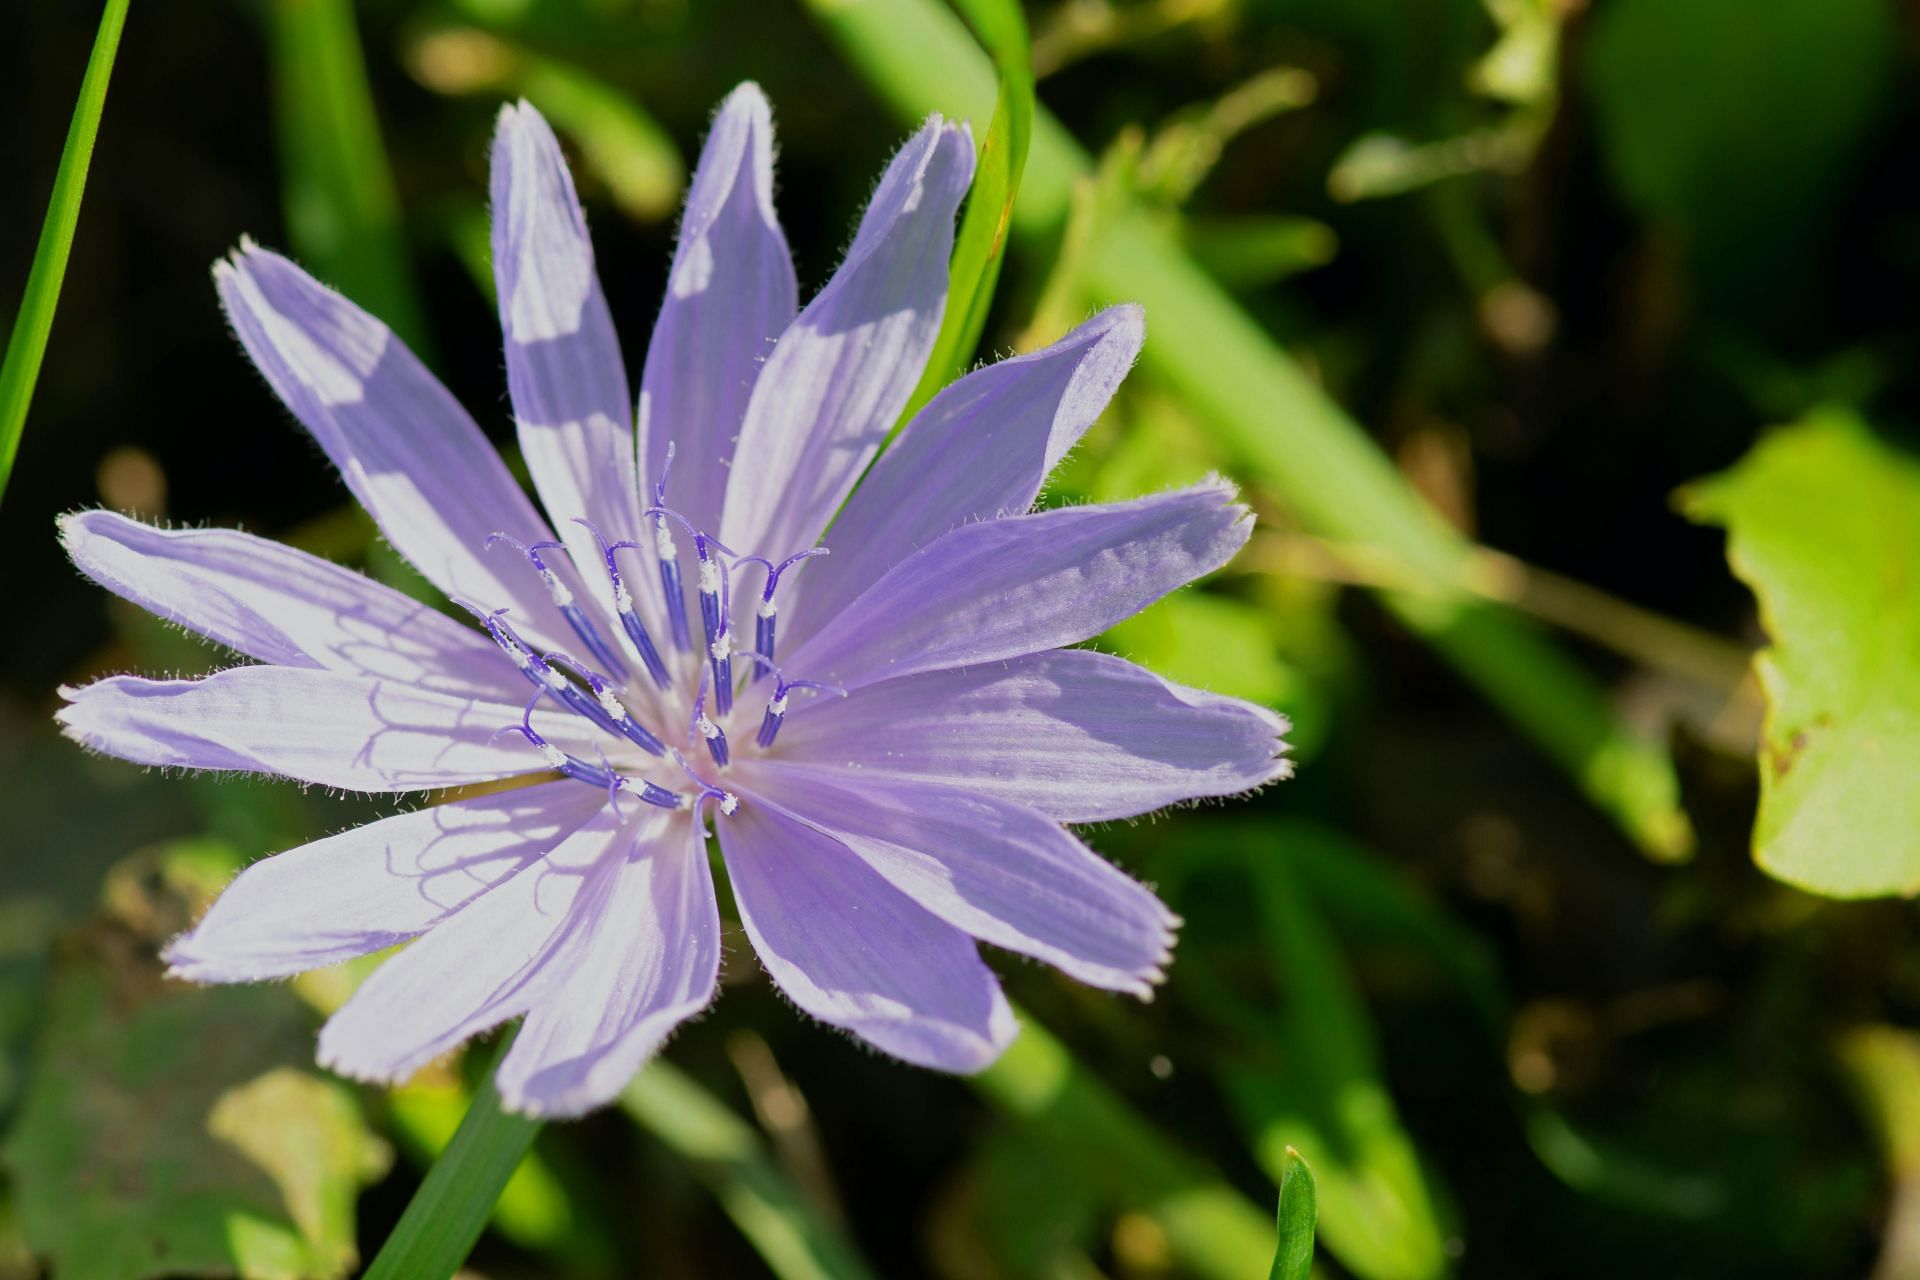 Chicory root is obtained from chicory plant having blue flowers. (Image via Unsplash/ Raymond Eichelberger)